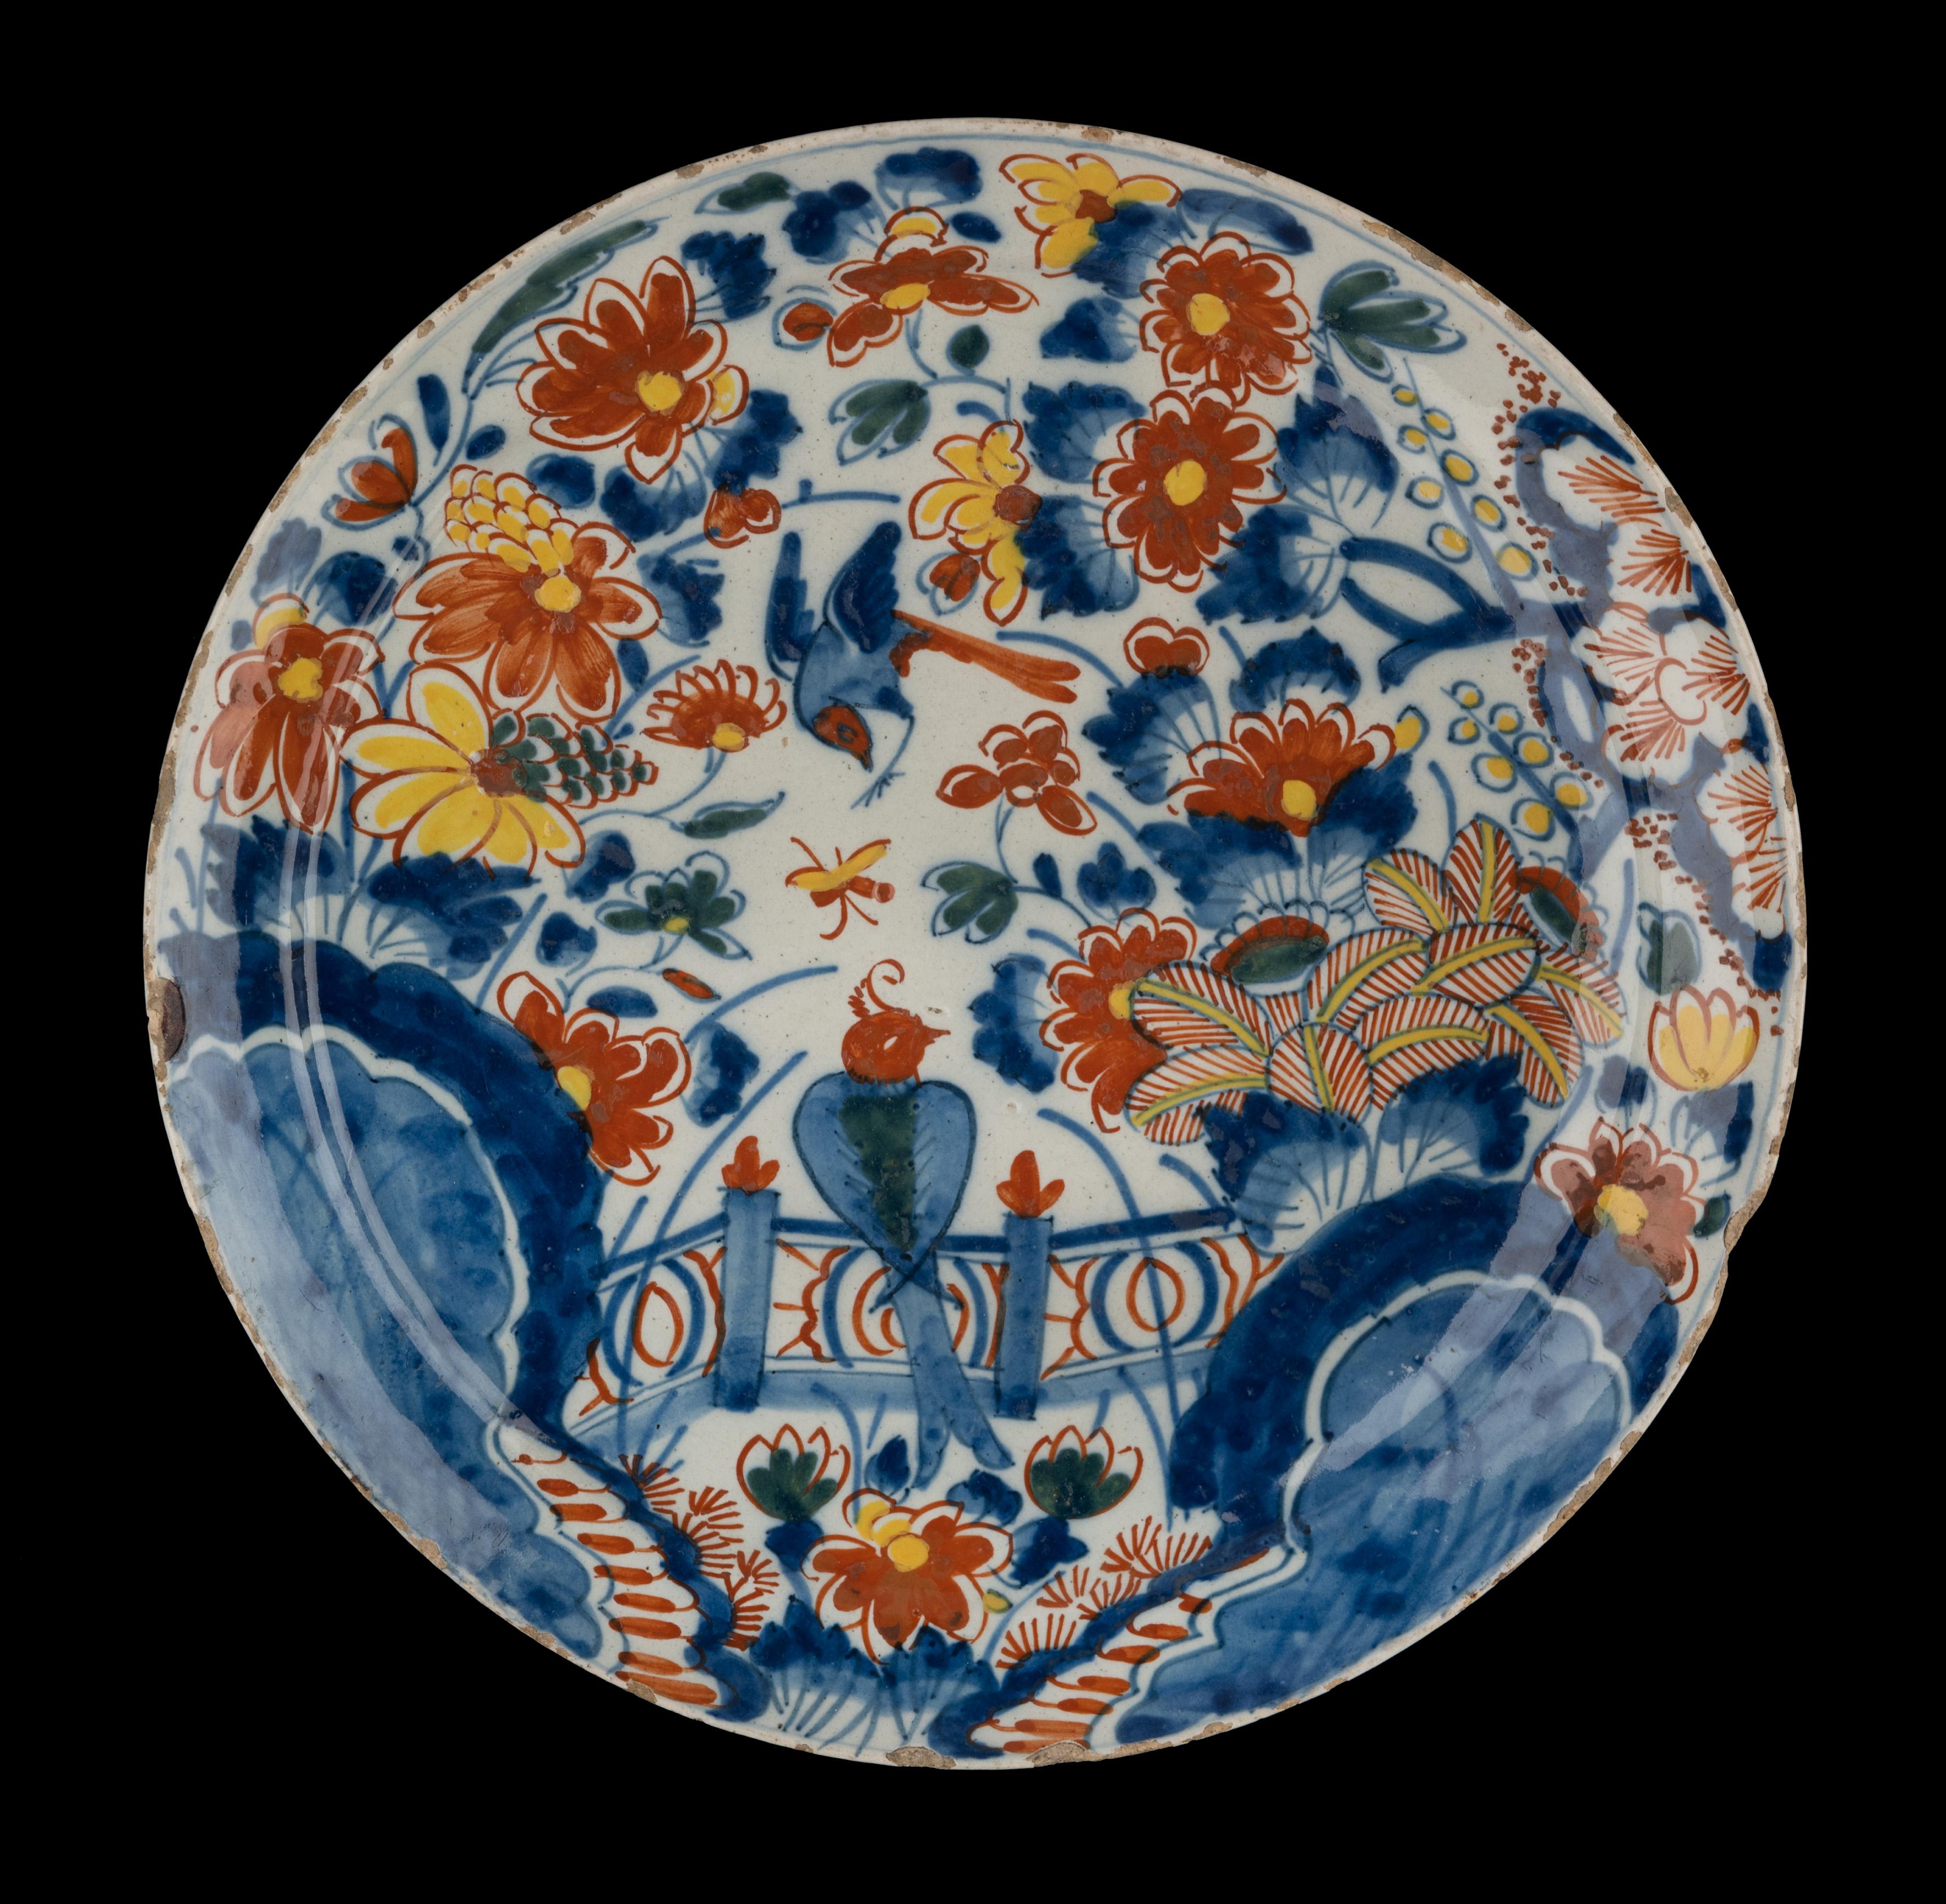 Baroque Polychrome Plate with Flowers Delft, 1713-1740 the Porcelain Claw Pottery